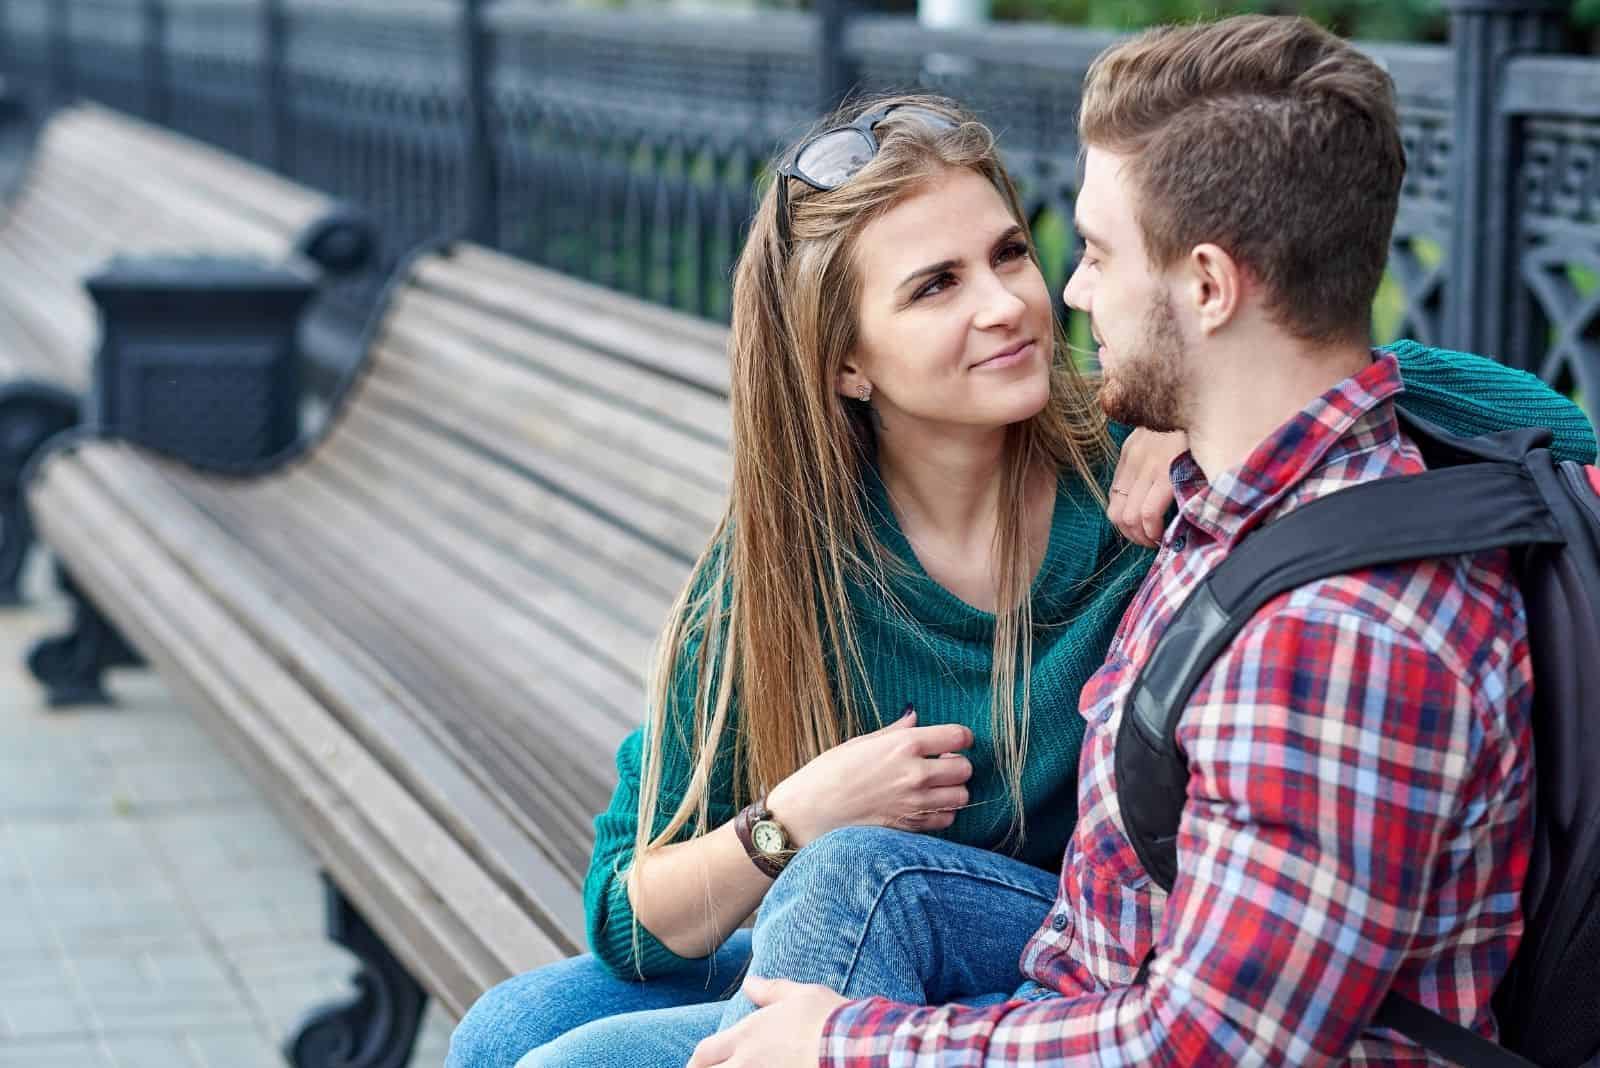 sweet couple hugging and sitting in a bench outdoors